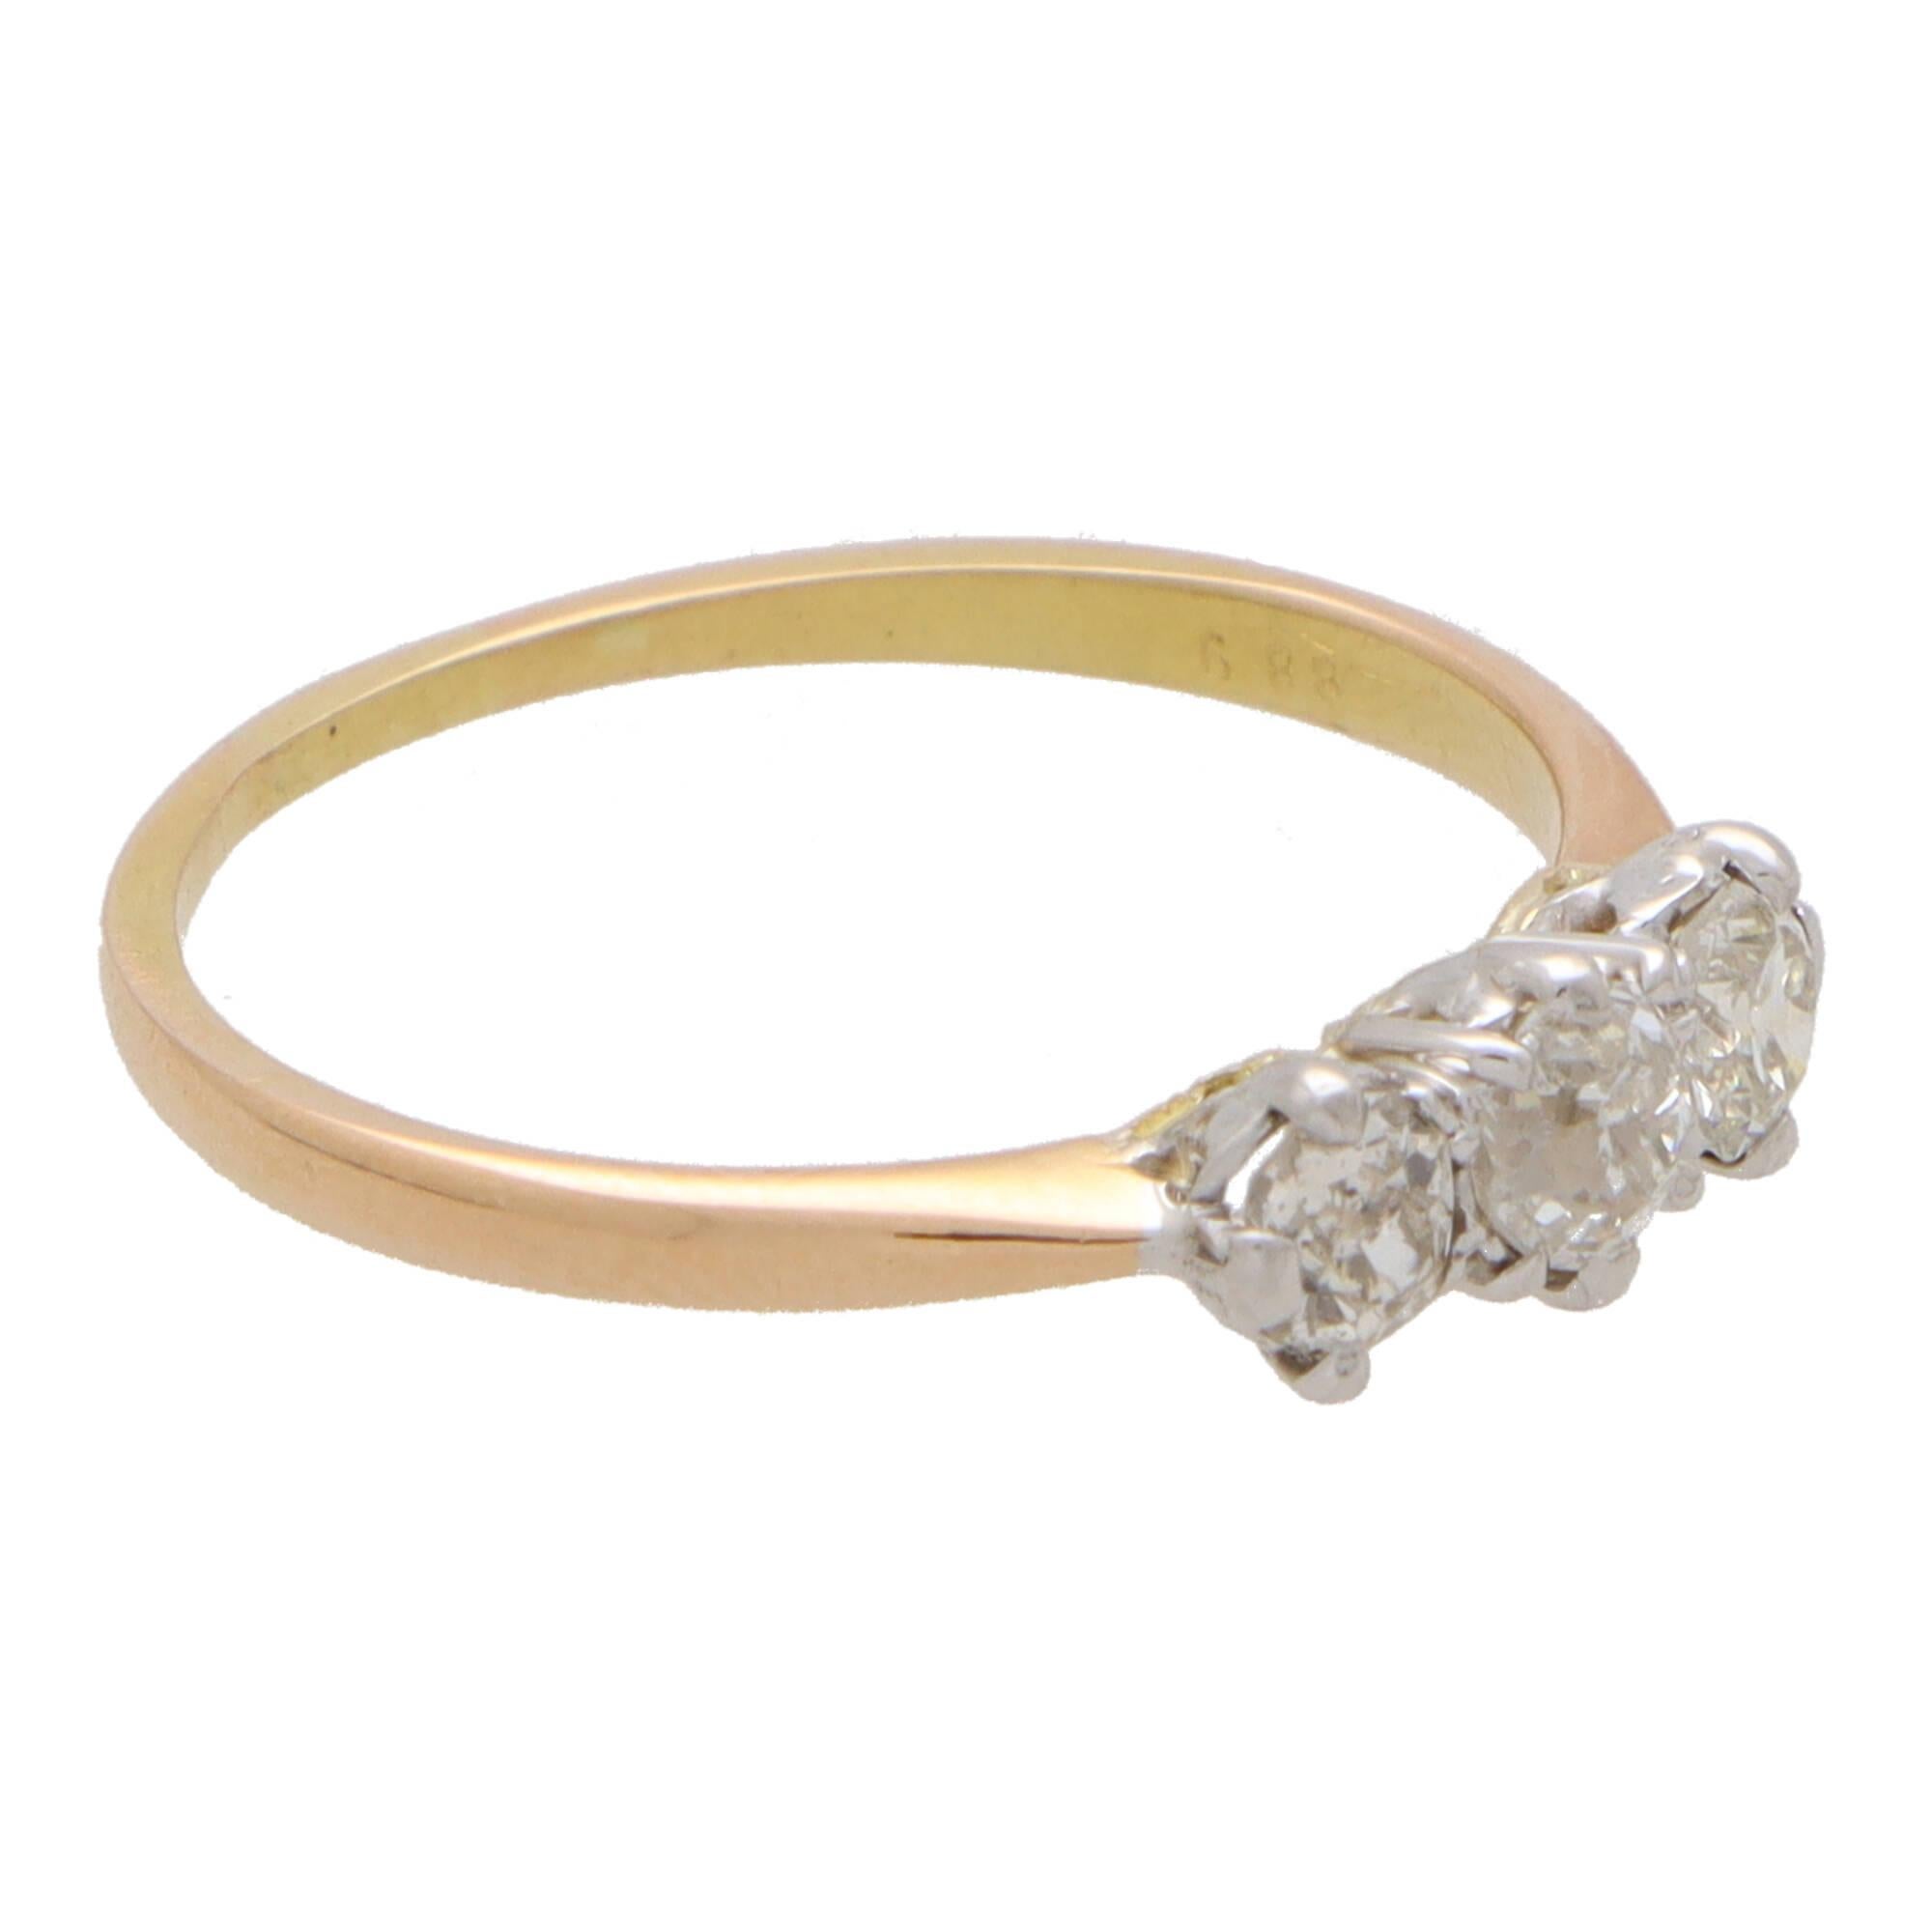 A beautiful vintage old mine cut diamond three stone ring set in 18k yellow and rose gold.

The piece is composed of three sparkly old mine cut diamond stones which are all claw set securely.  Uniquely the inner band is yellow gold and the outer